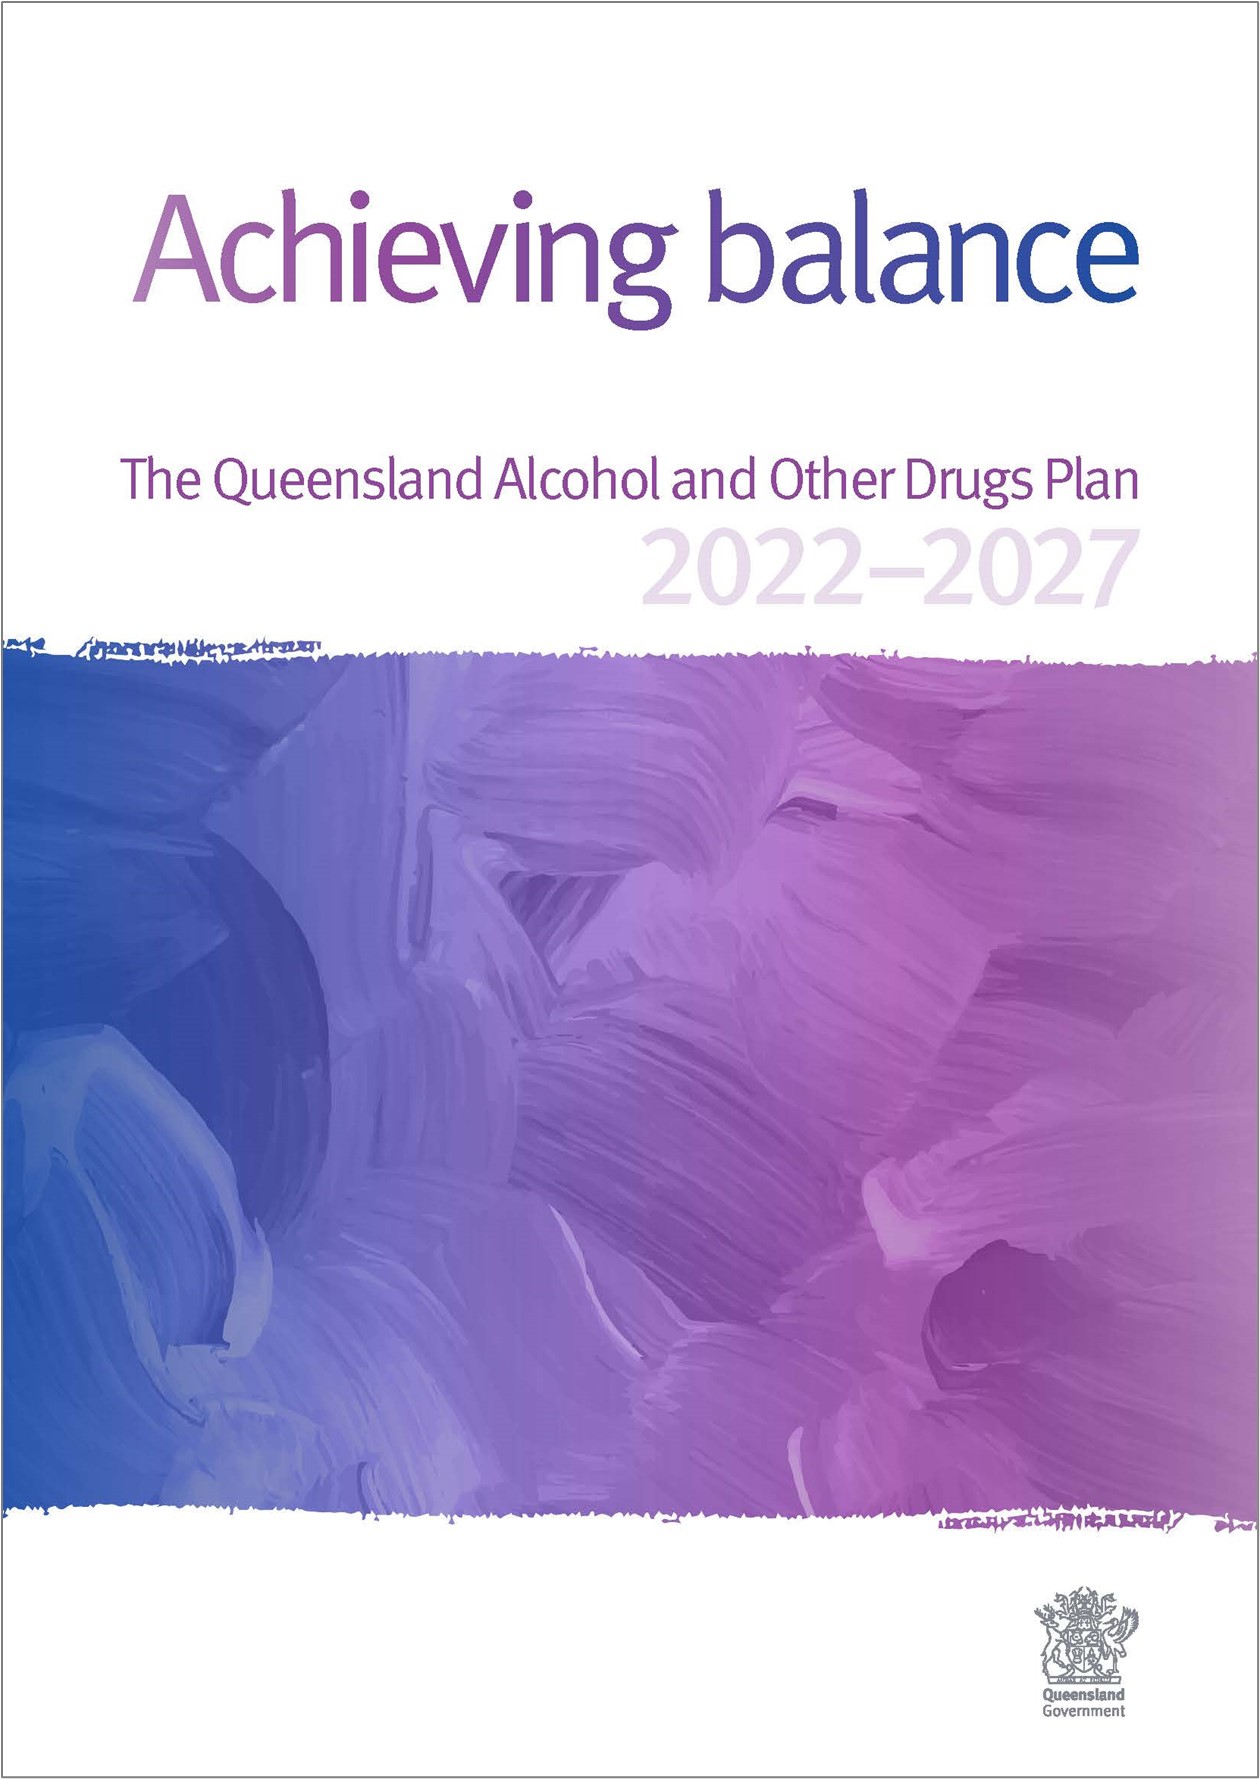 Achieving balance – The Queensland Alcohol and Other Drugs Plan 2022-2027